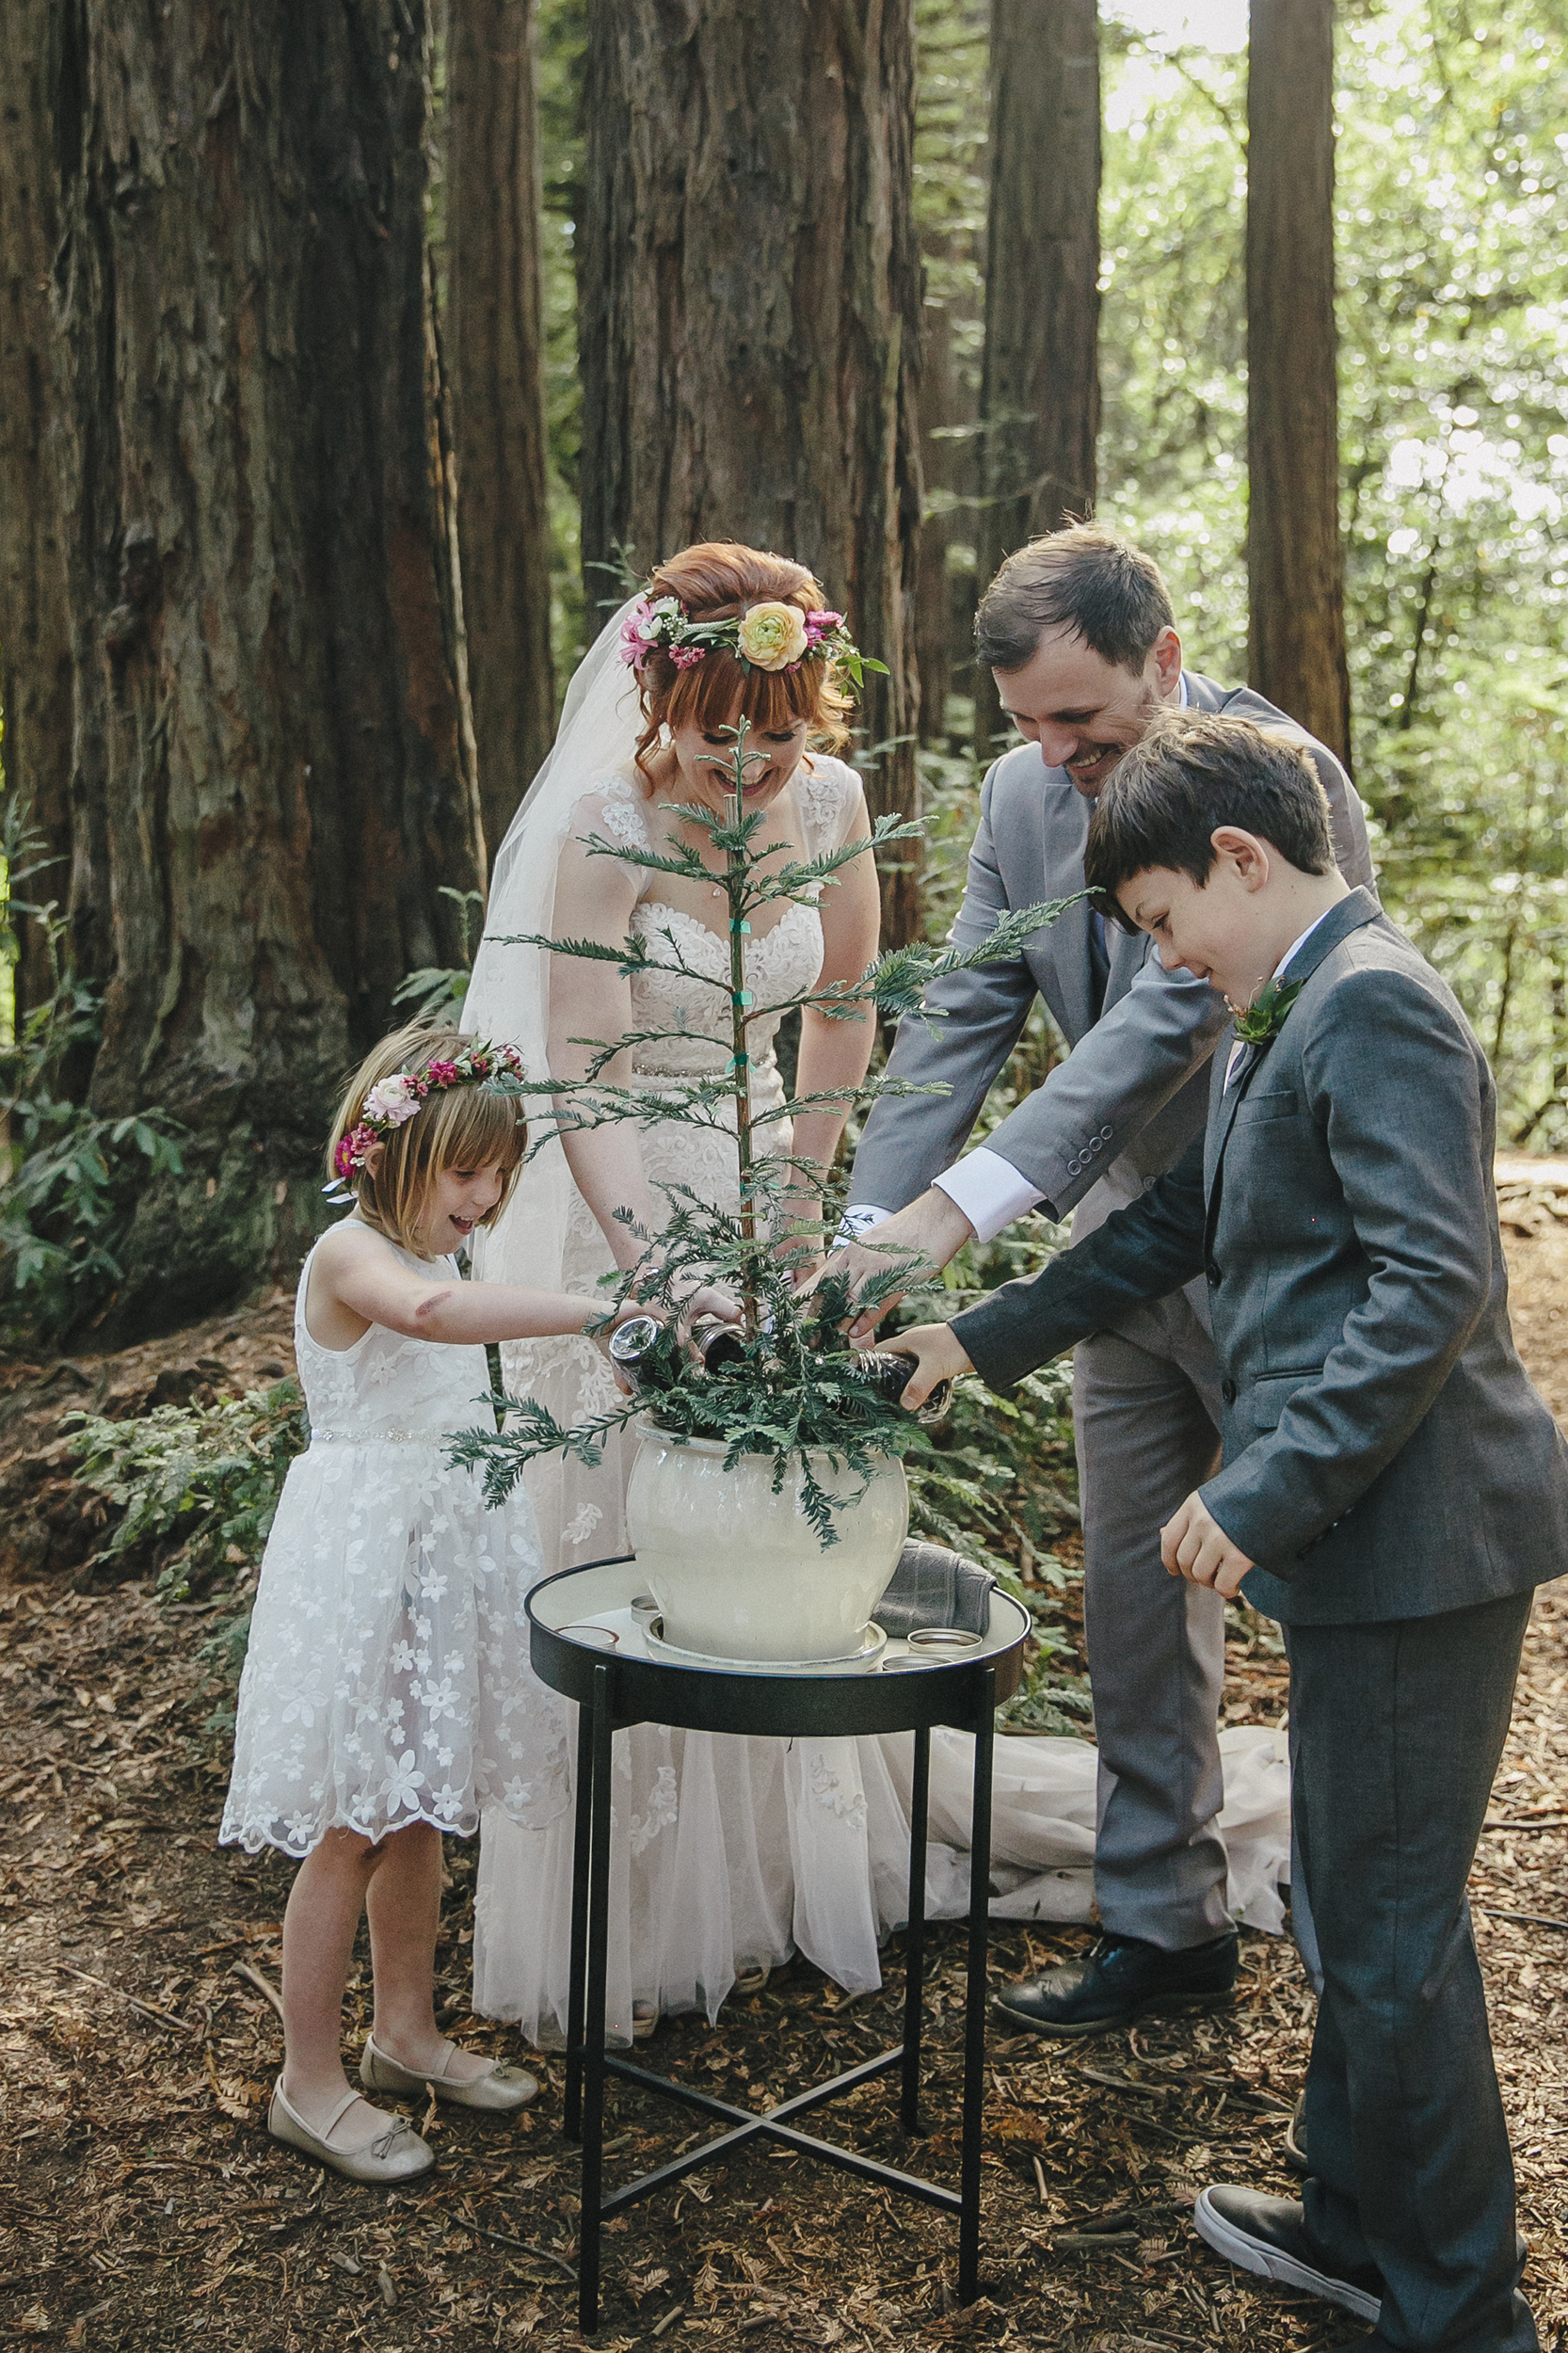 A woman in a wedding dress and a groom in a grey suit plant a potted tree among the redwoods together with two children—a girl in a white dress with a flower crown and a boy in a grey suit. Everyone smiles